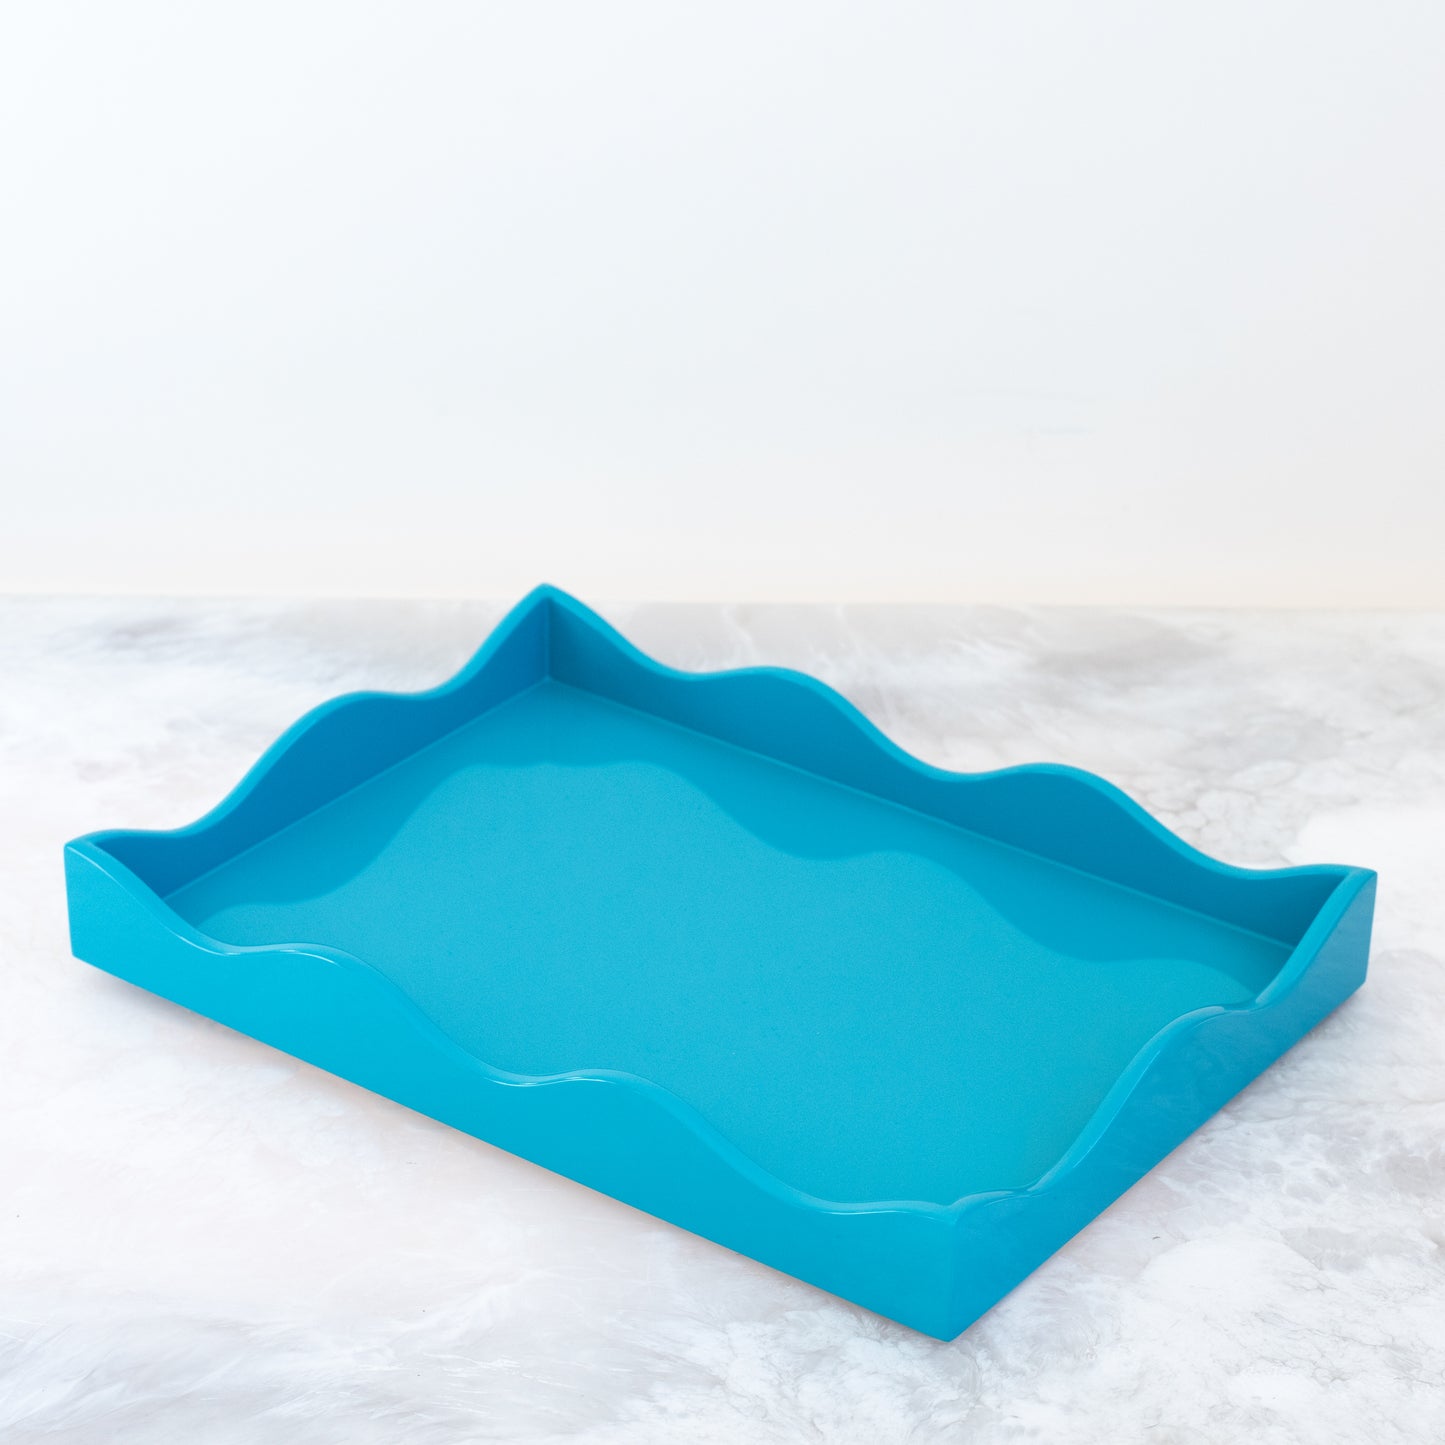 Small Belles Rives Lacquer Tray - Splash Blue